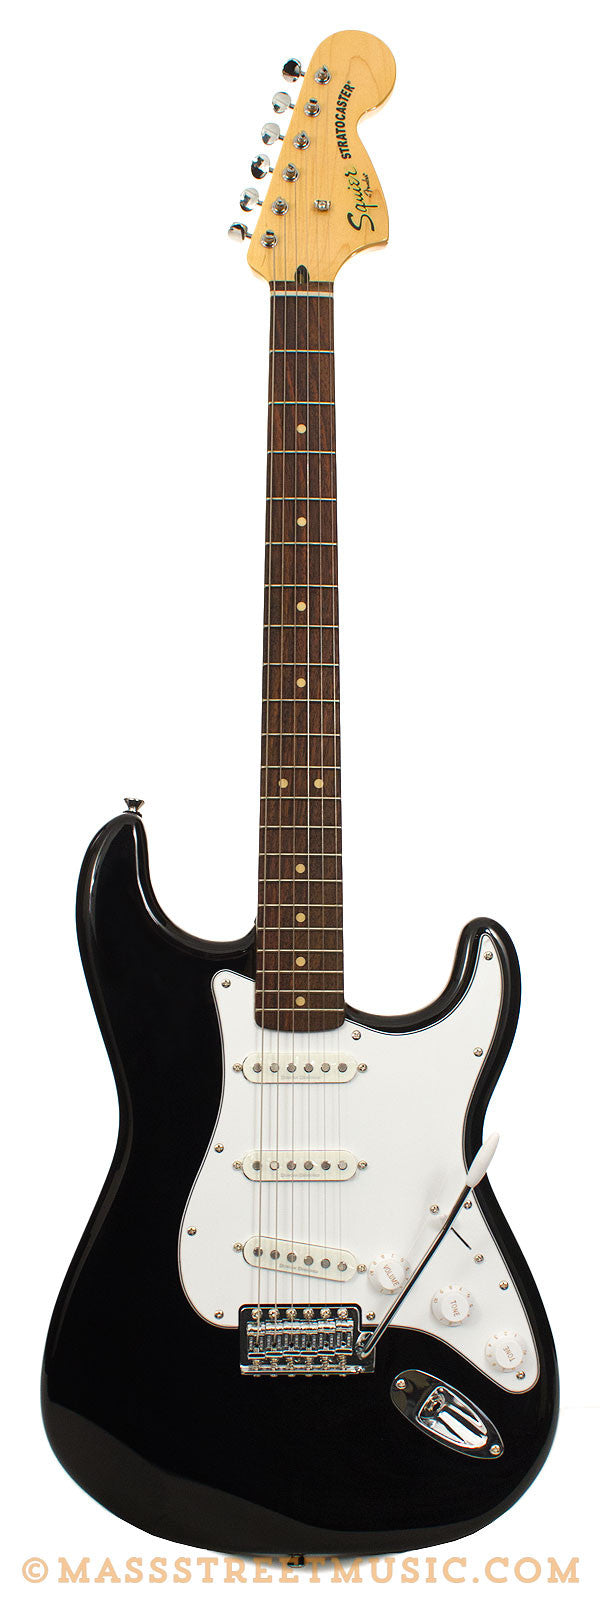 Squier - Stratocaster Vintage Modified Black Electric Guitar